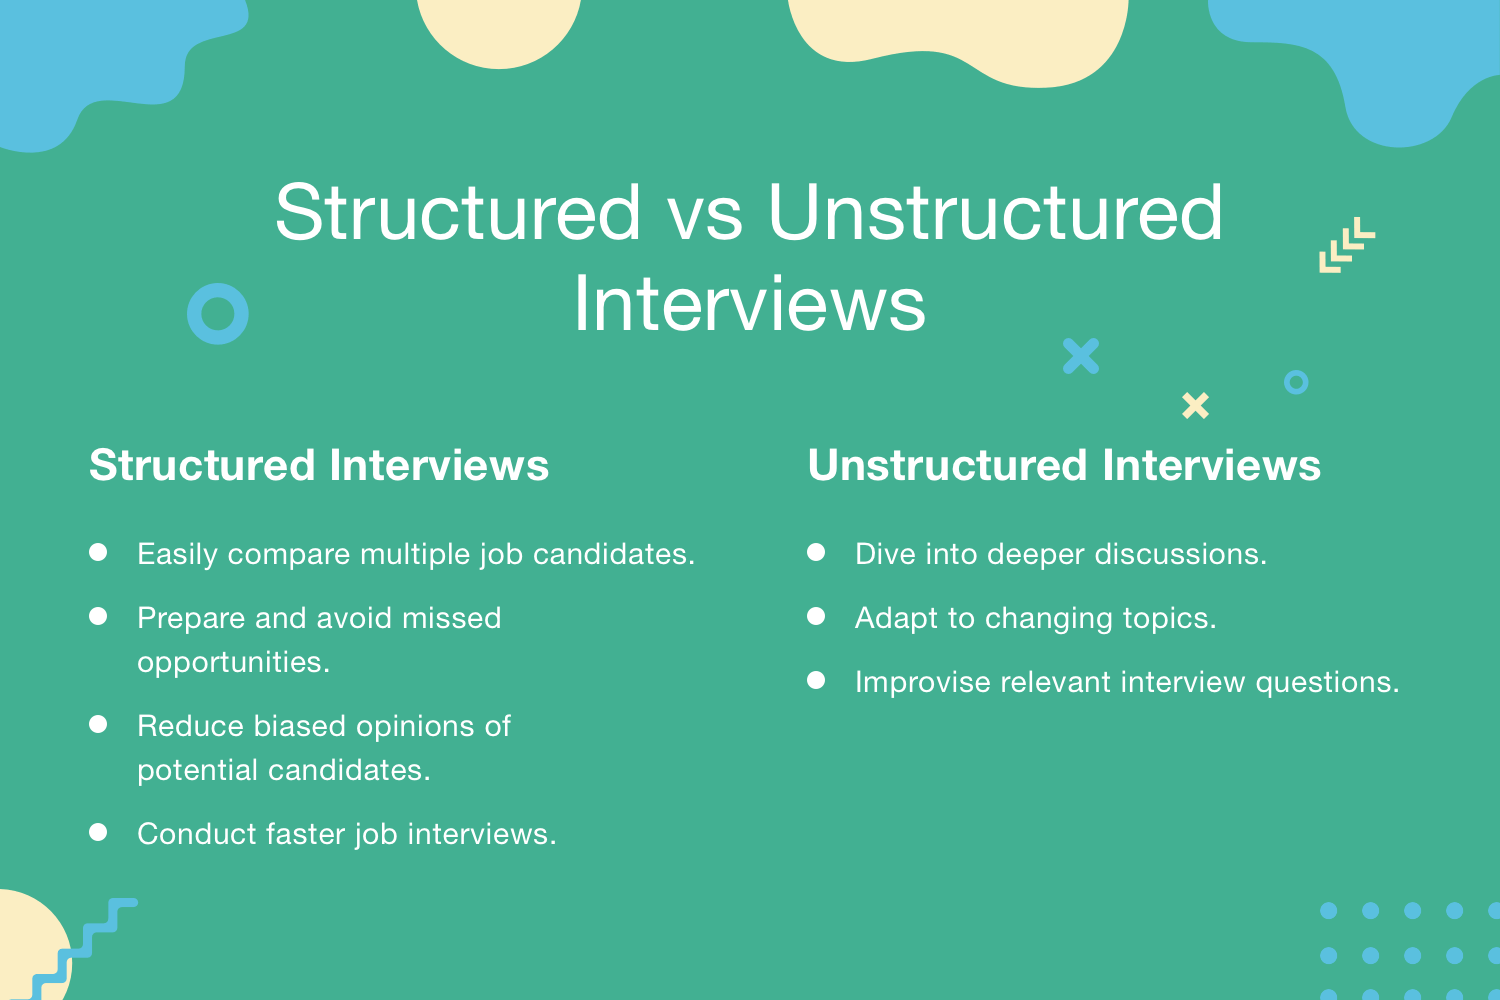 interview research method pros and cons